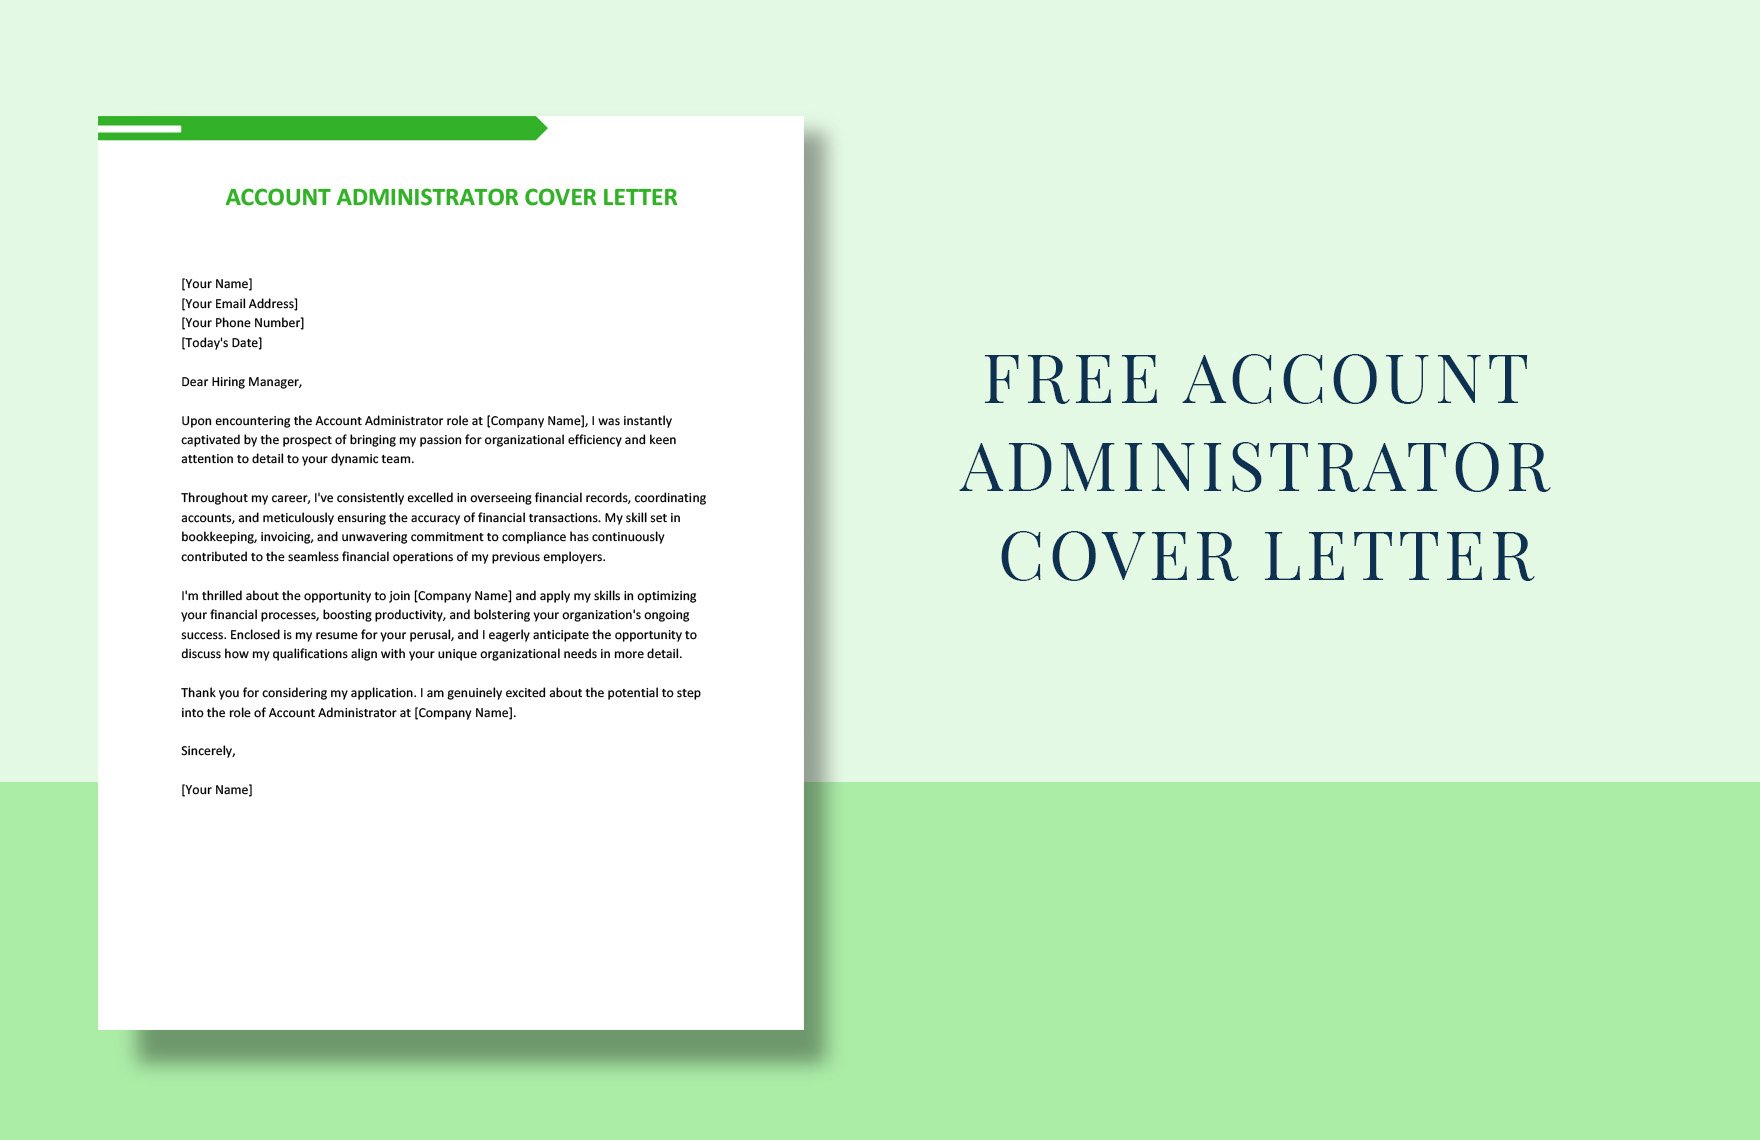 Account Administrator Cover Letter